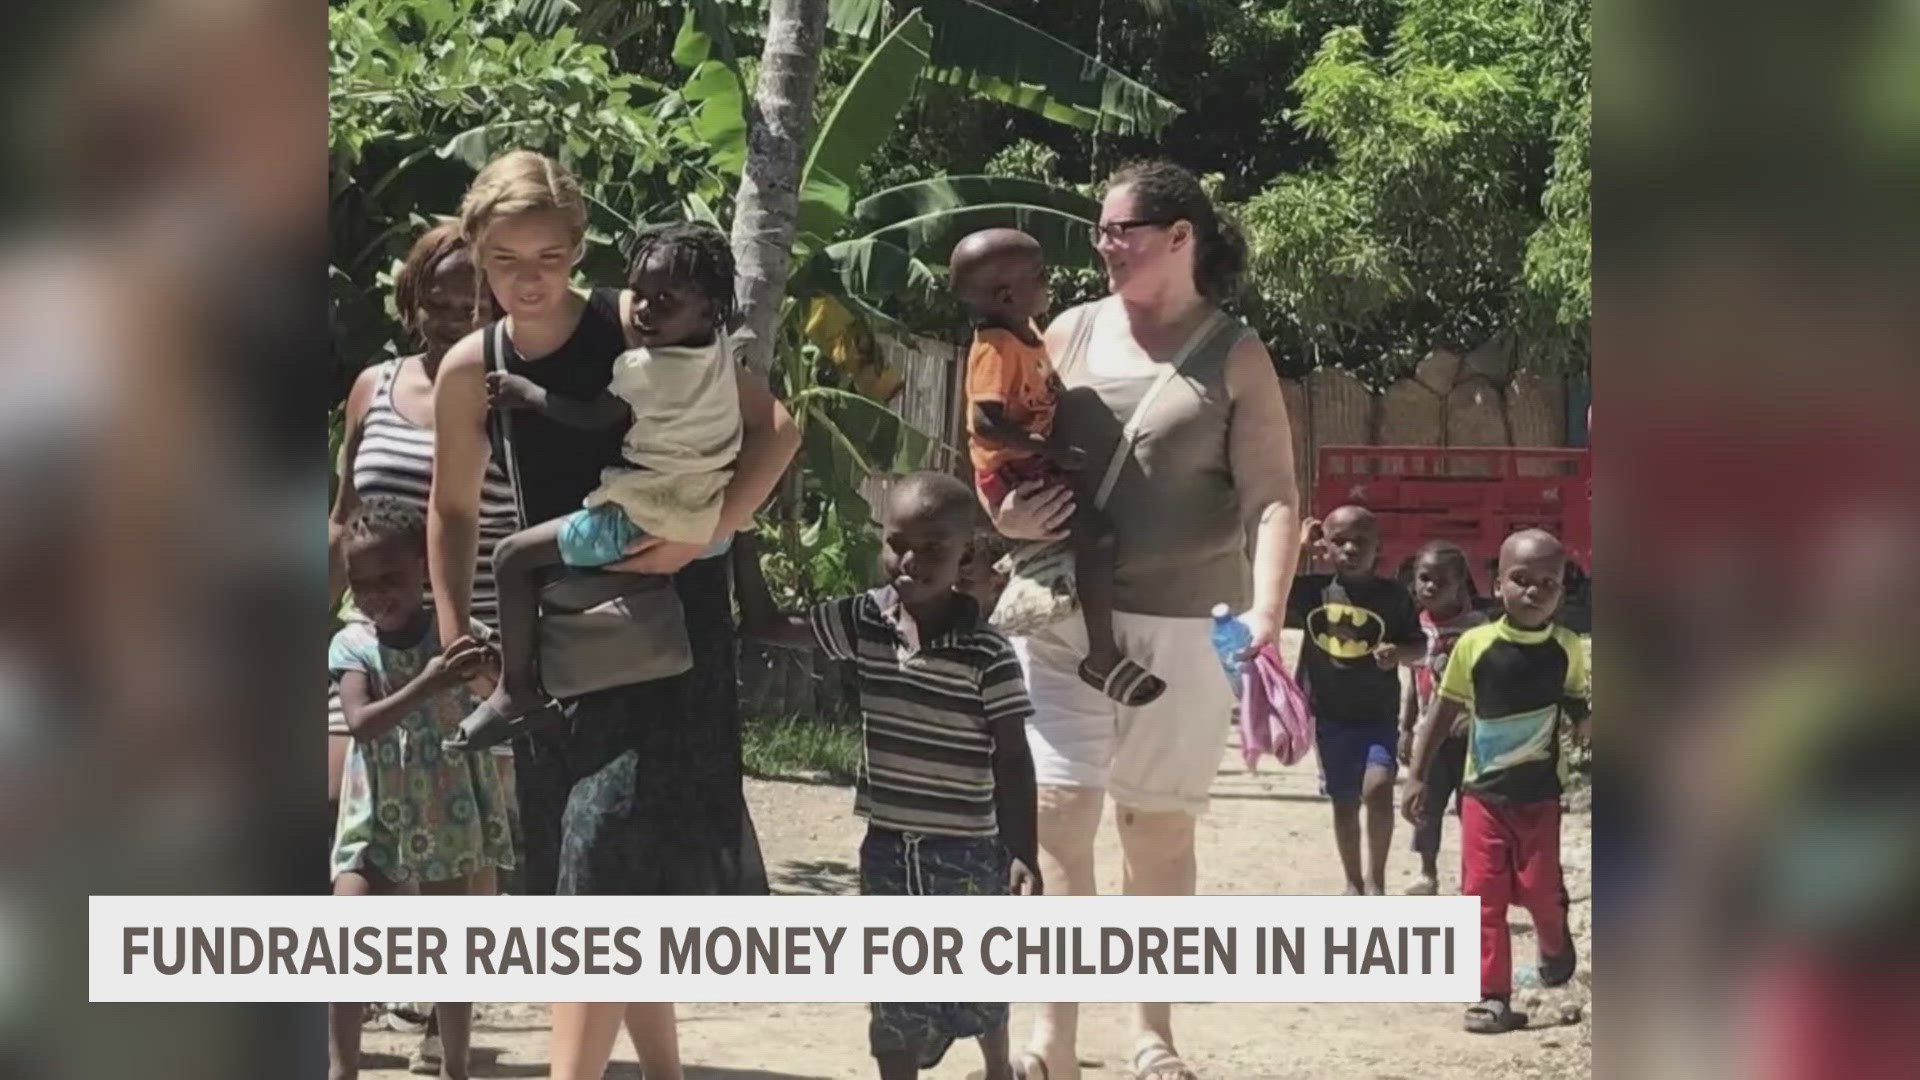 The annual fundraiser has helped clothe more than 100 children in Haiti.